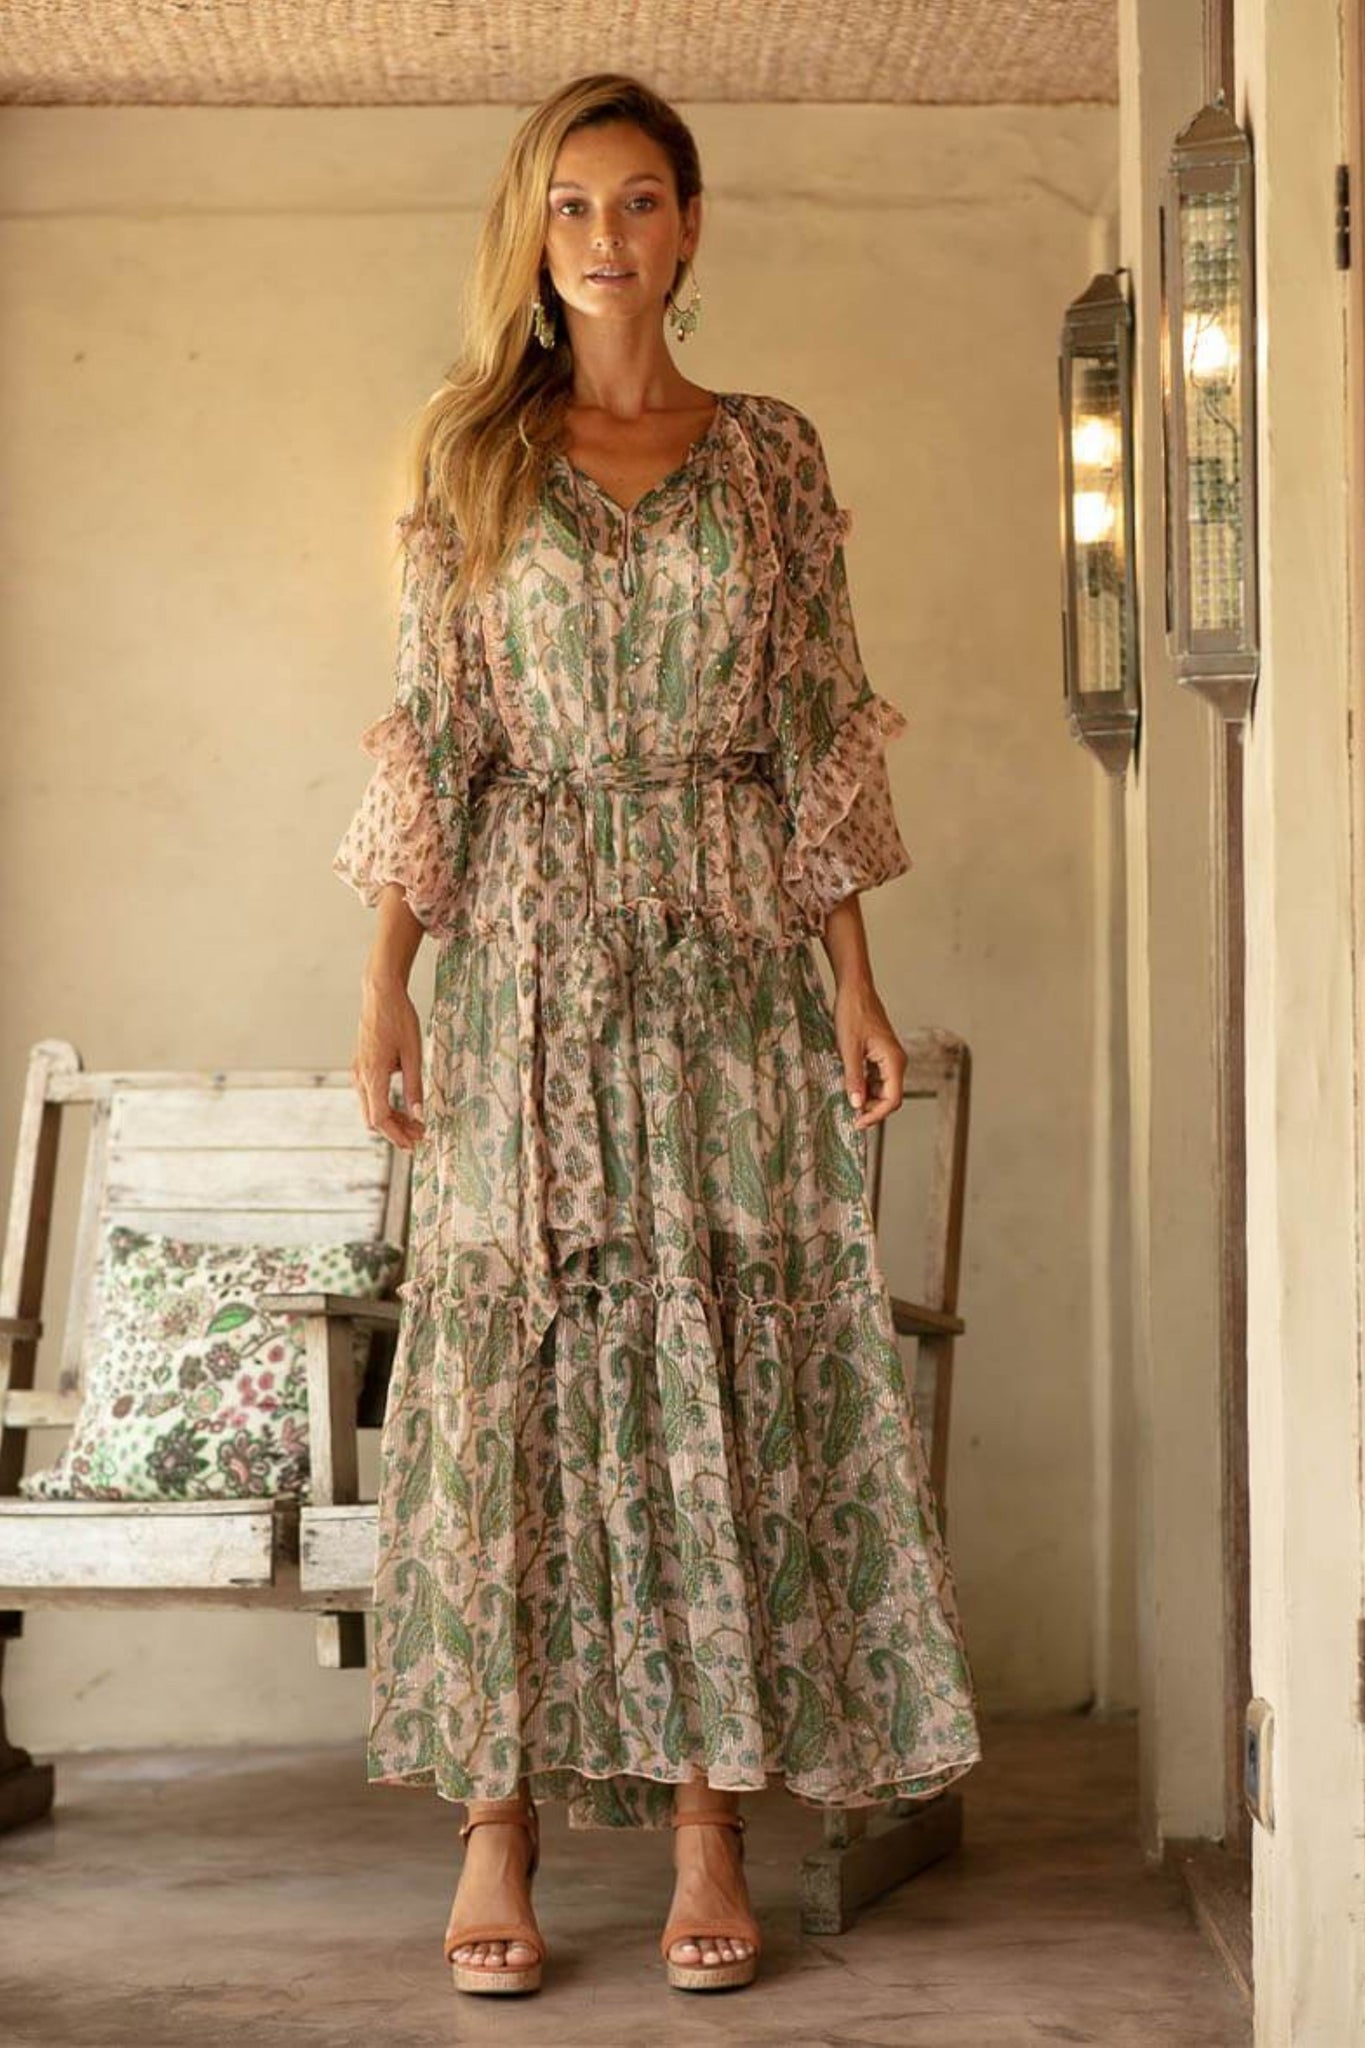 Buy Miss June Paris Wild Rose Maxi Dress online now at Australian Stockists Smoke and Mirrors Boutique. Khaki and Pink Sheer Boho Dress with Lurex Thread